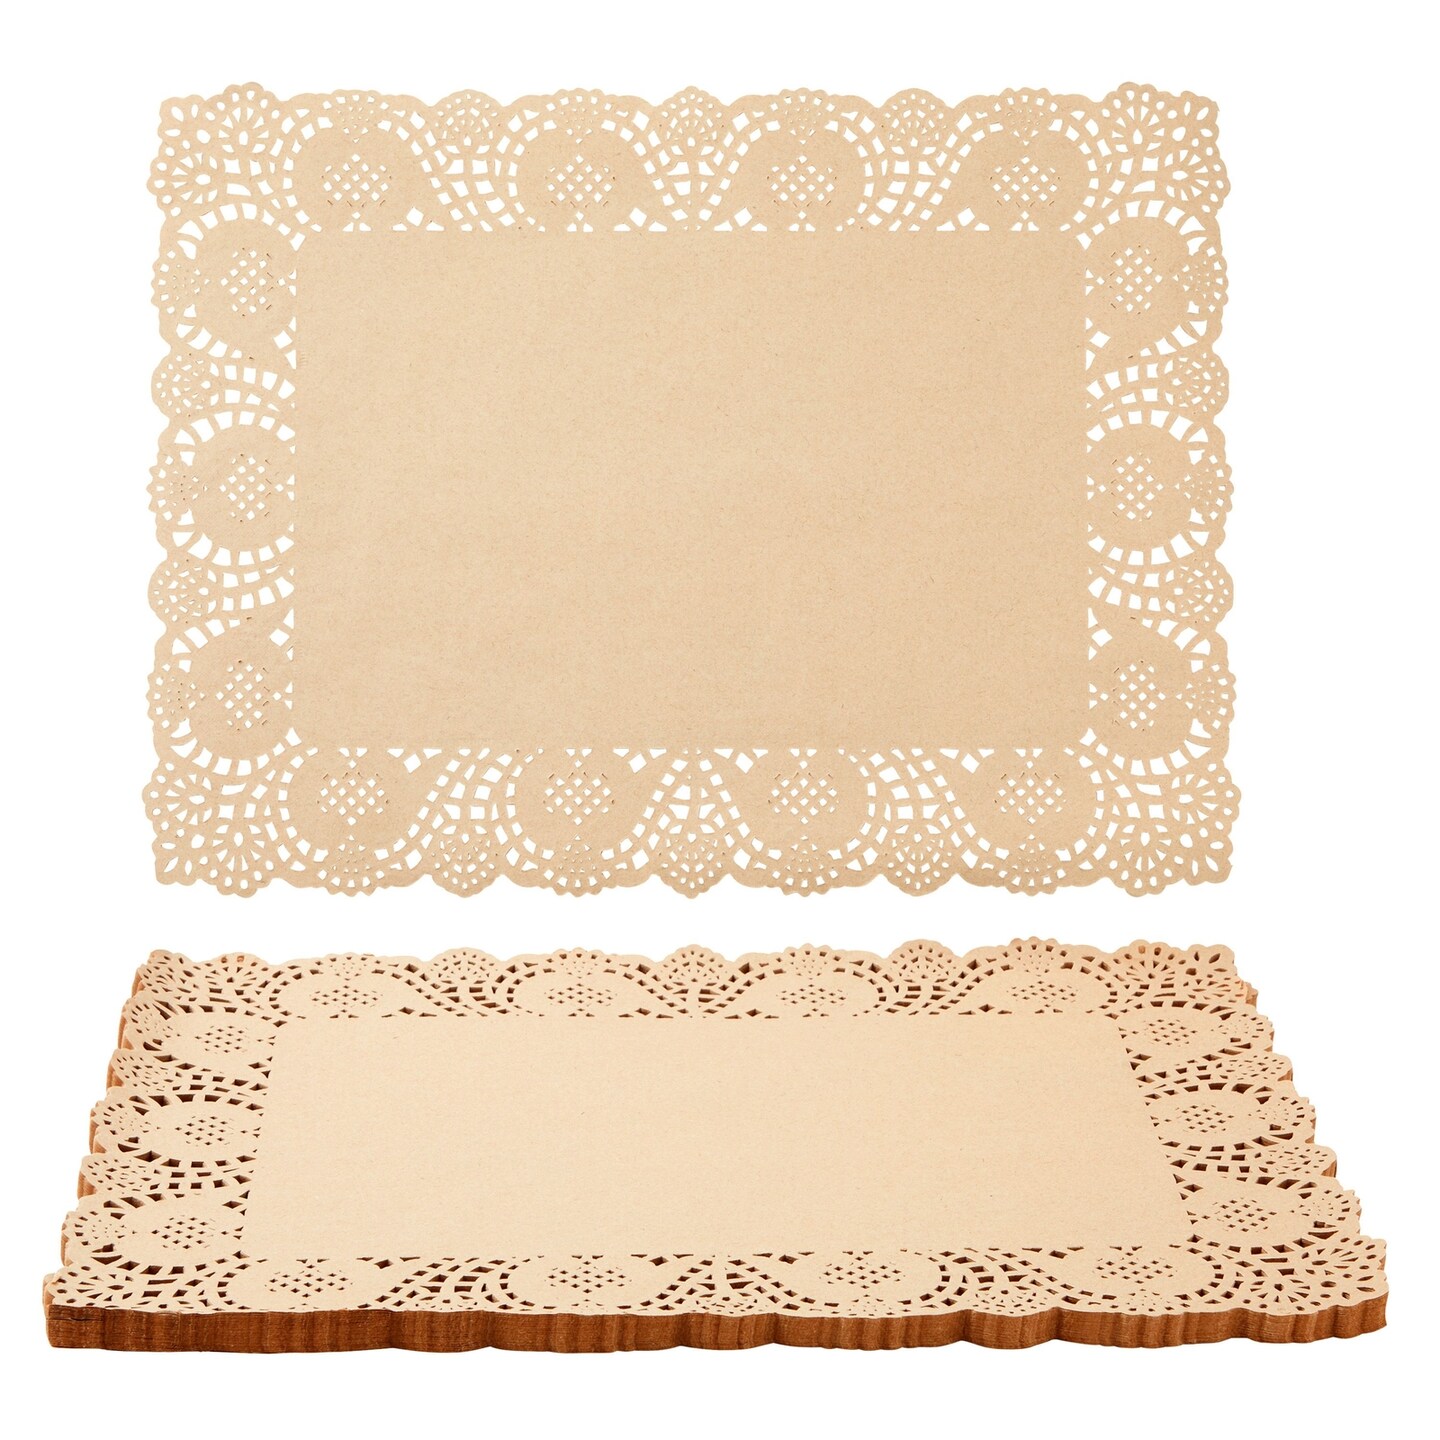 100-Pack Brown Rectangle Disposable Placemats - Fall Lace Paper Doilies for Wedding Table, Thanksgiving, Party (15.5x11.7 In)